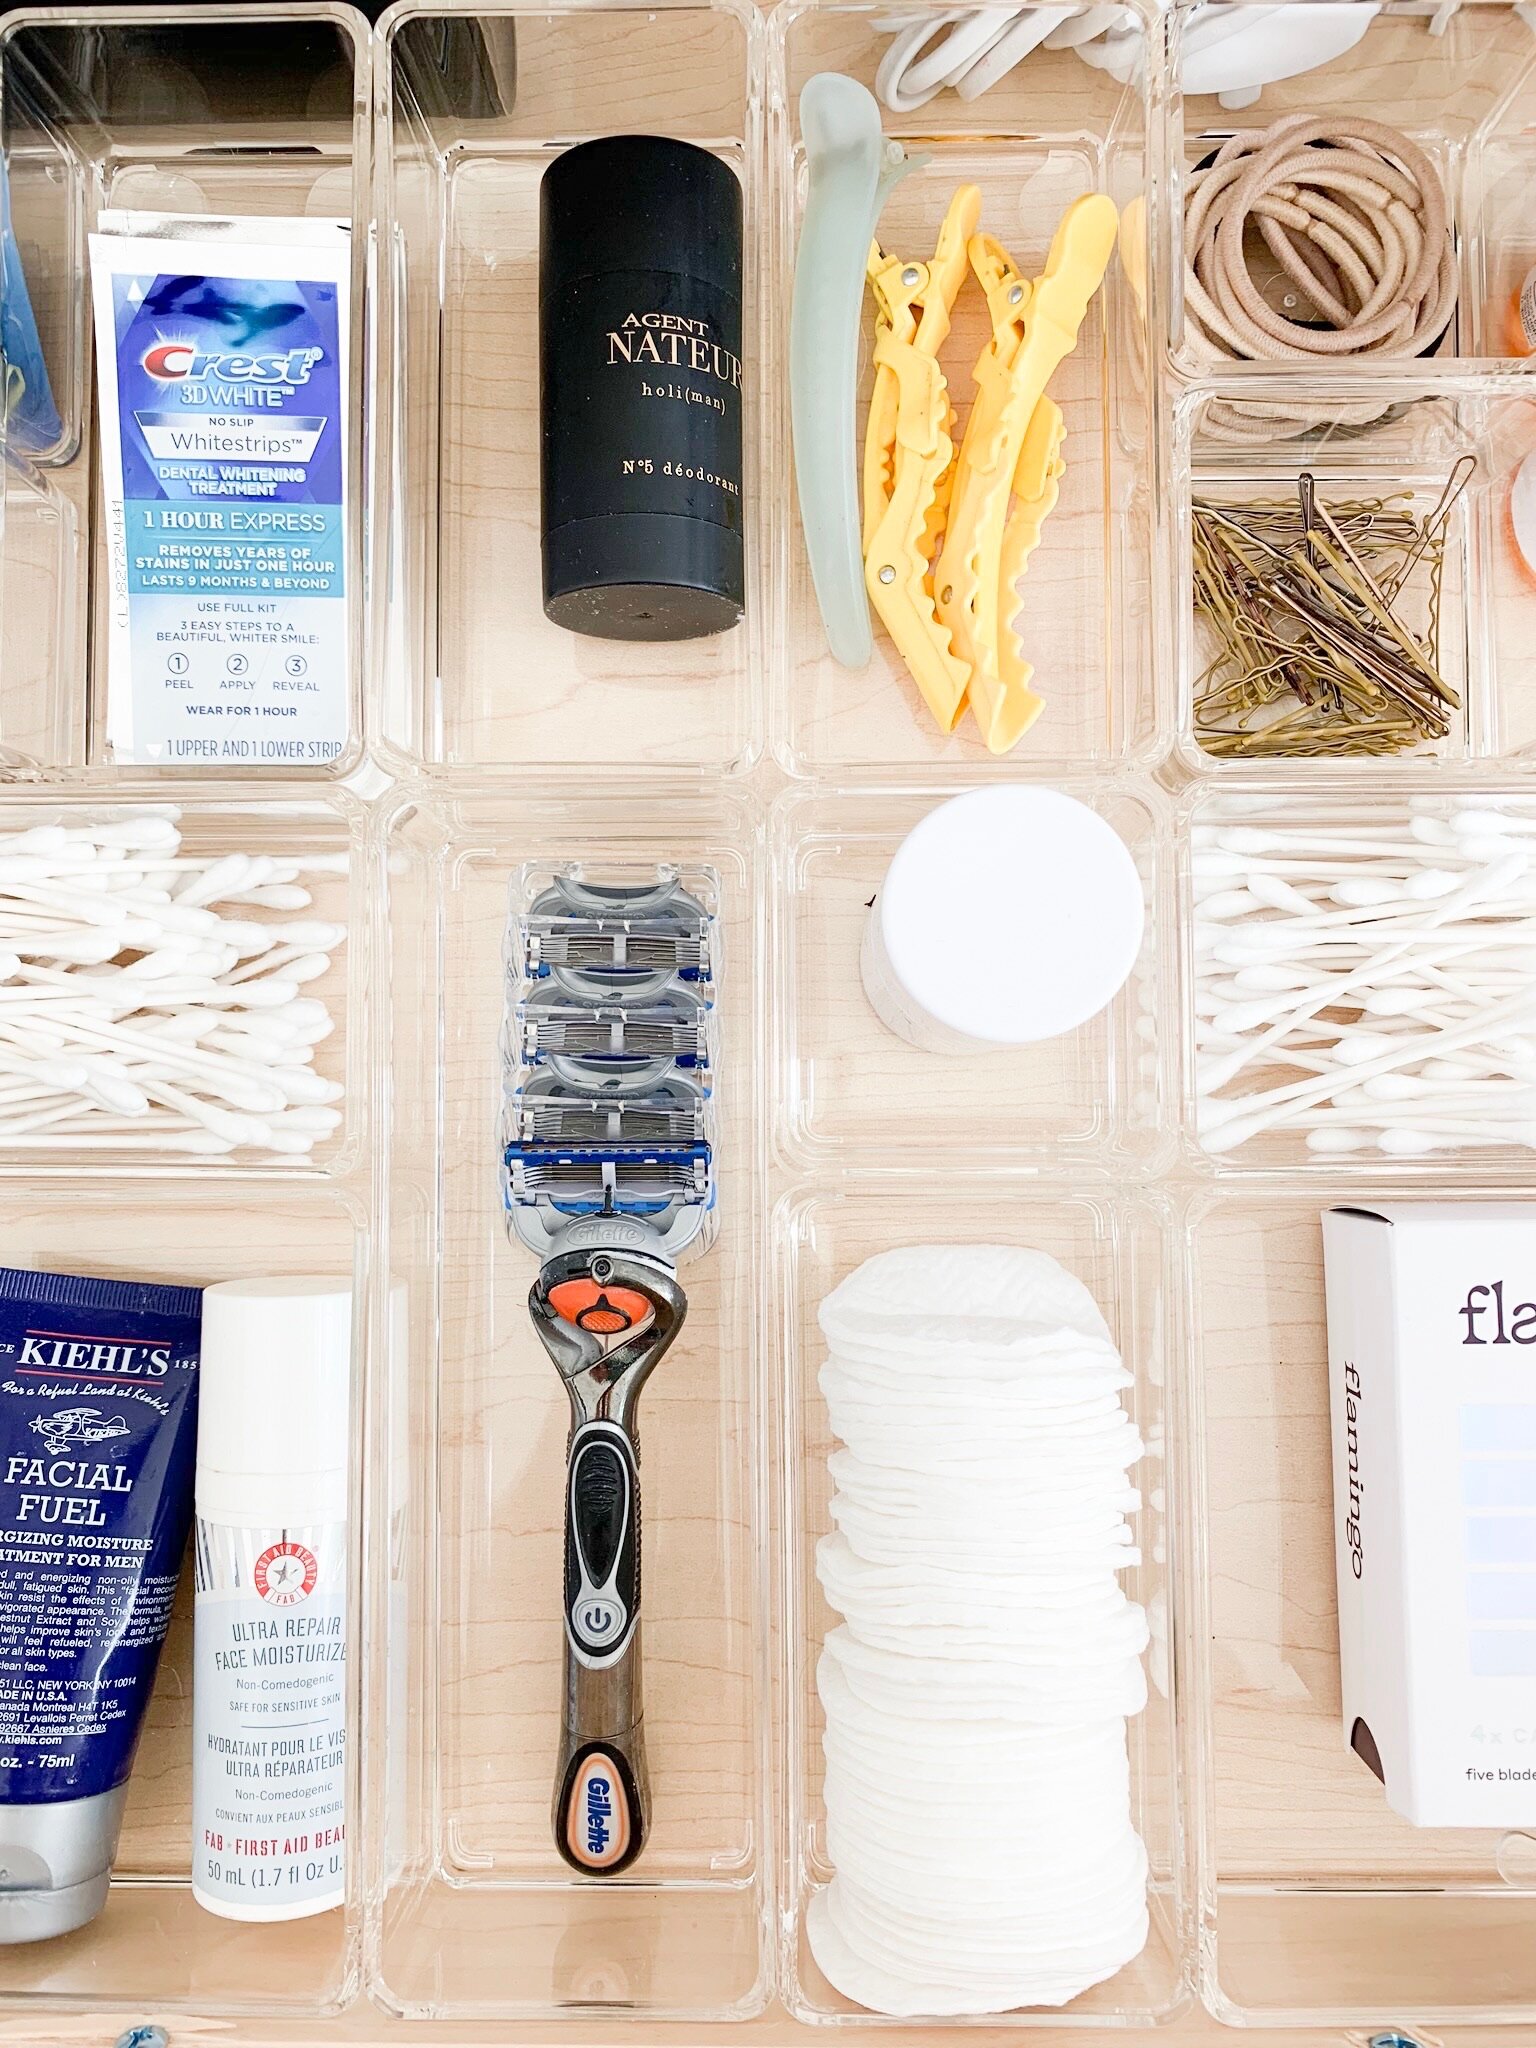 Great for giving each toiletry its own home within the drawer.